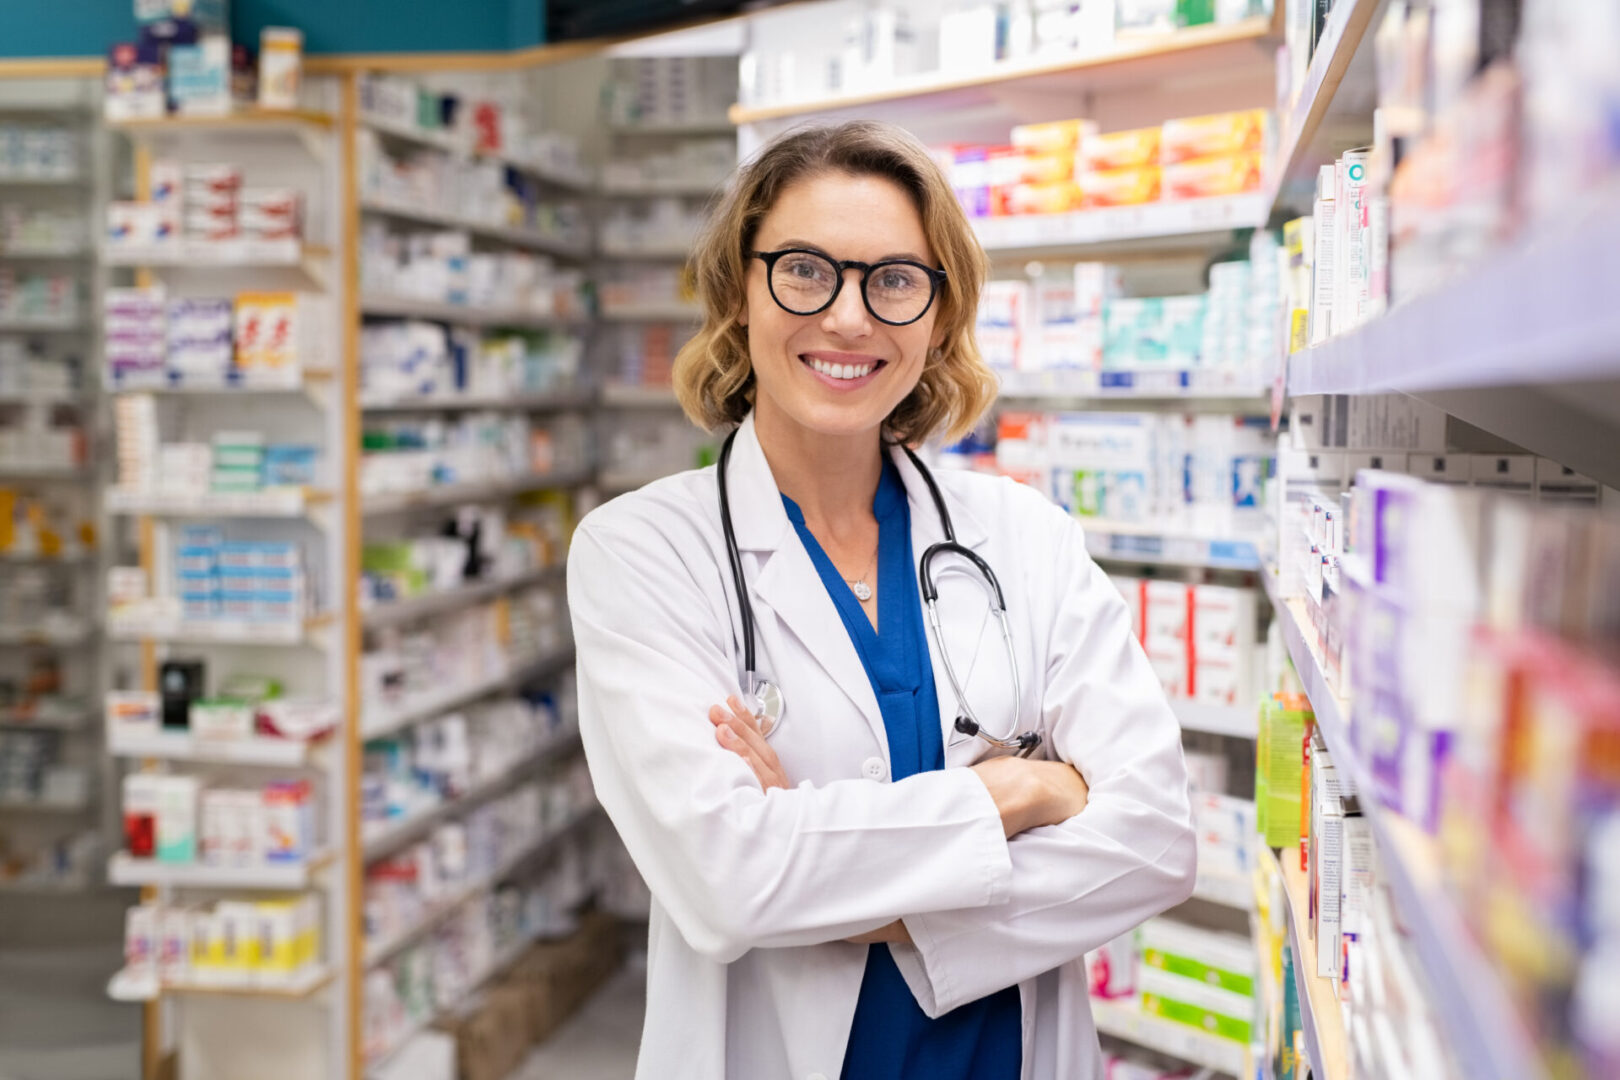 A woman in white coat standing next to shelves of medicine.